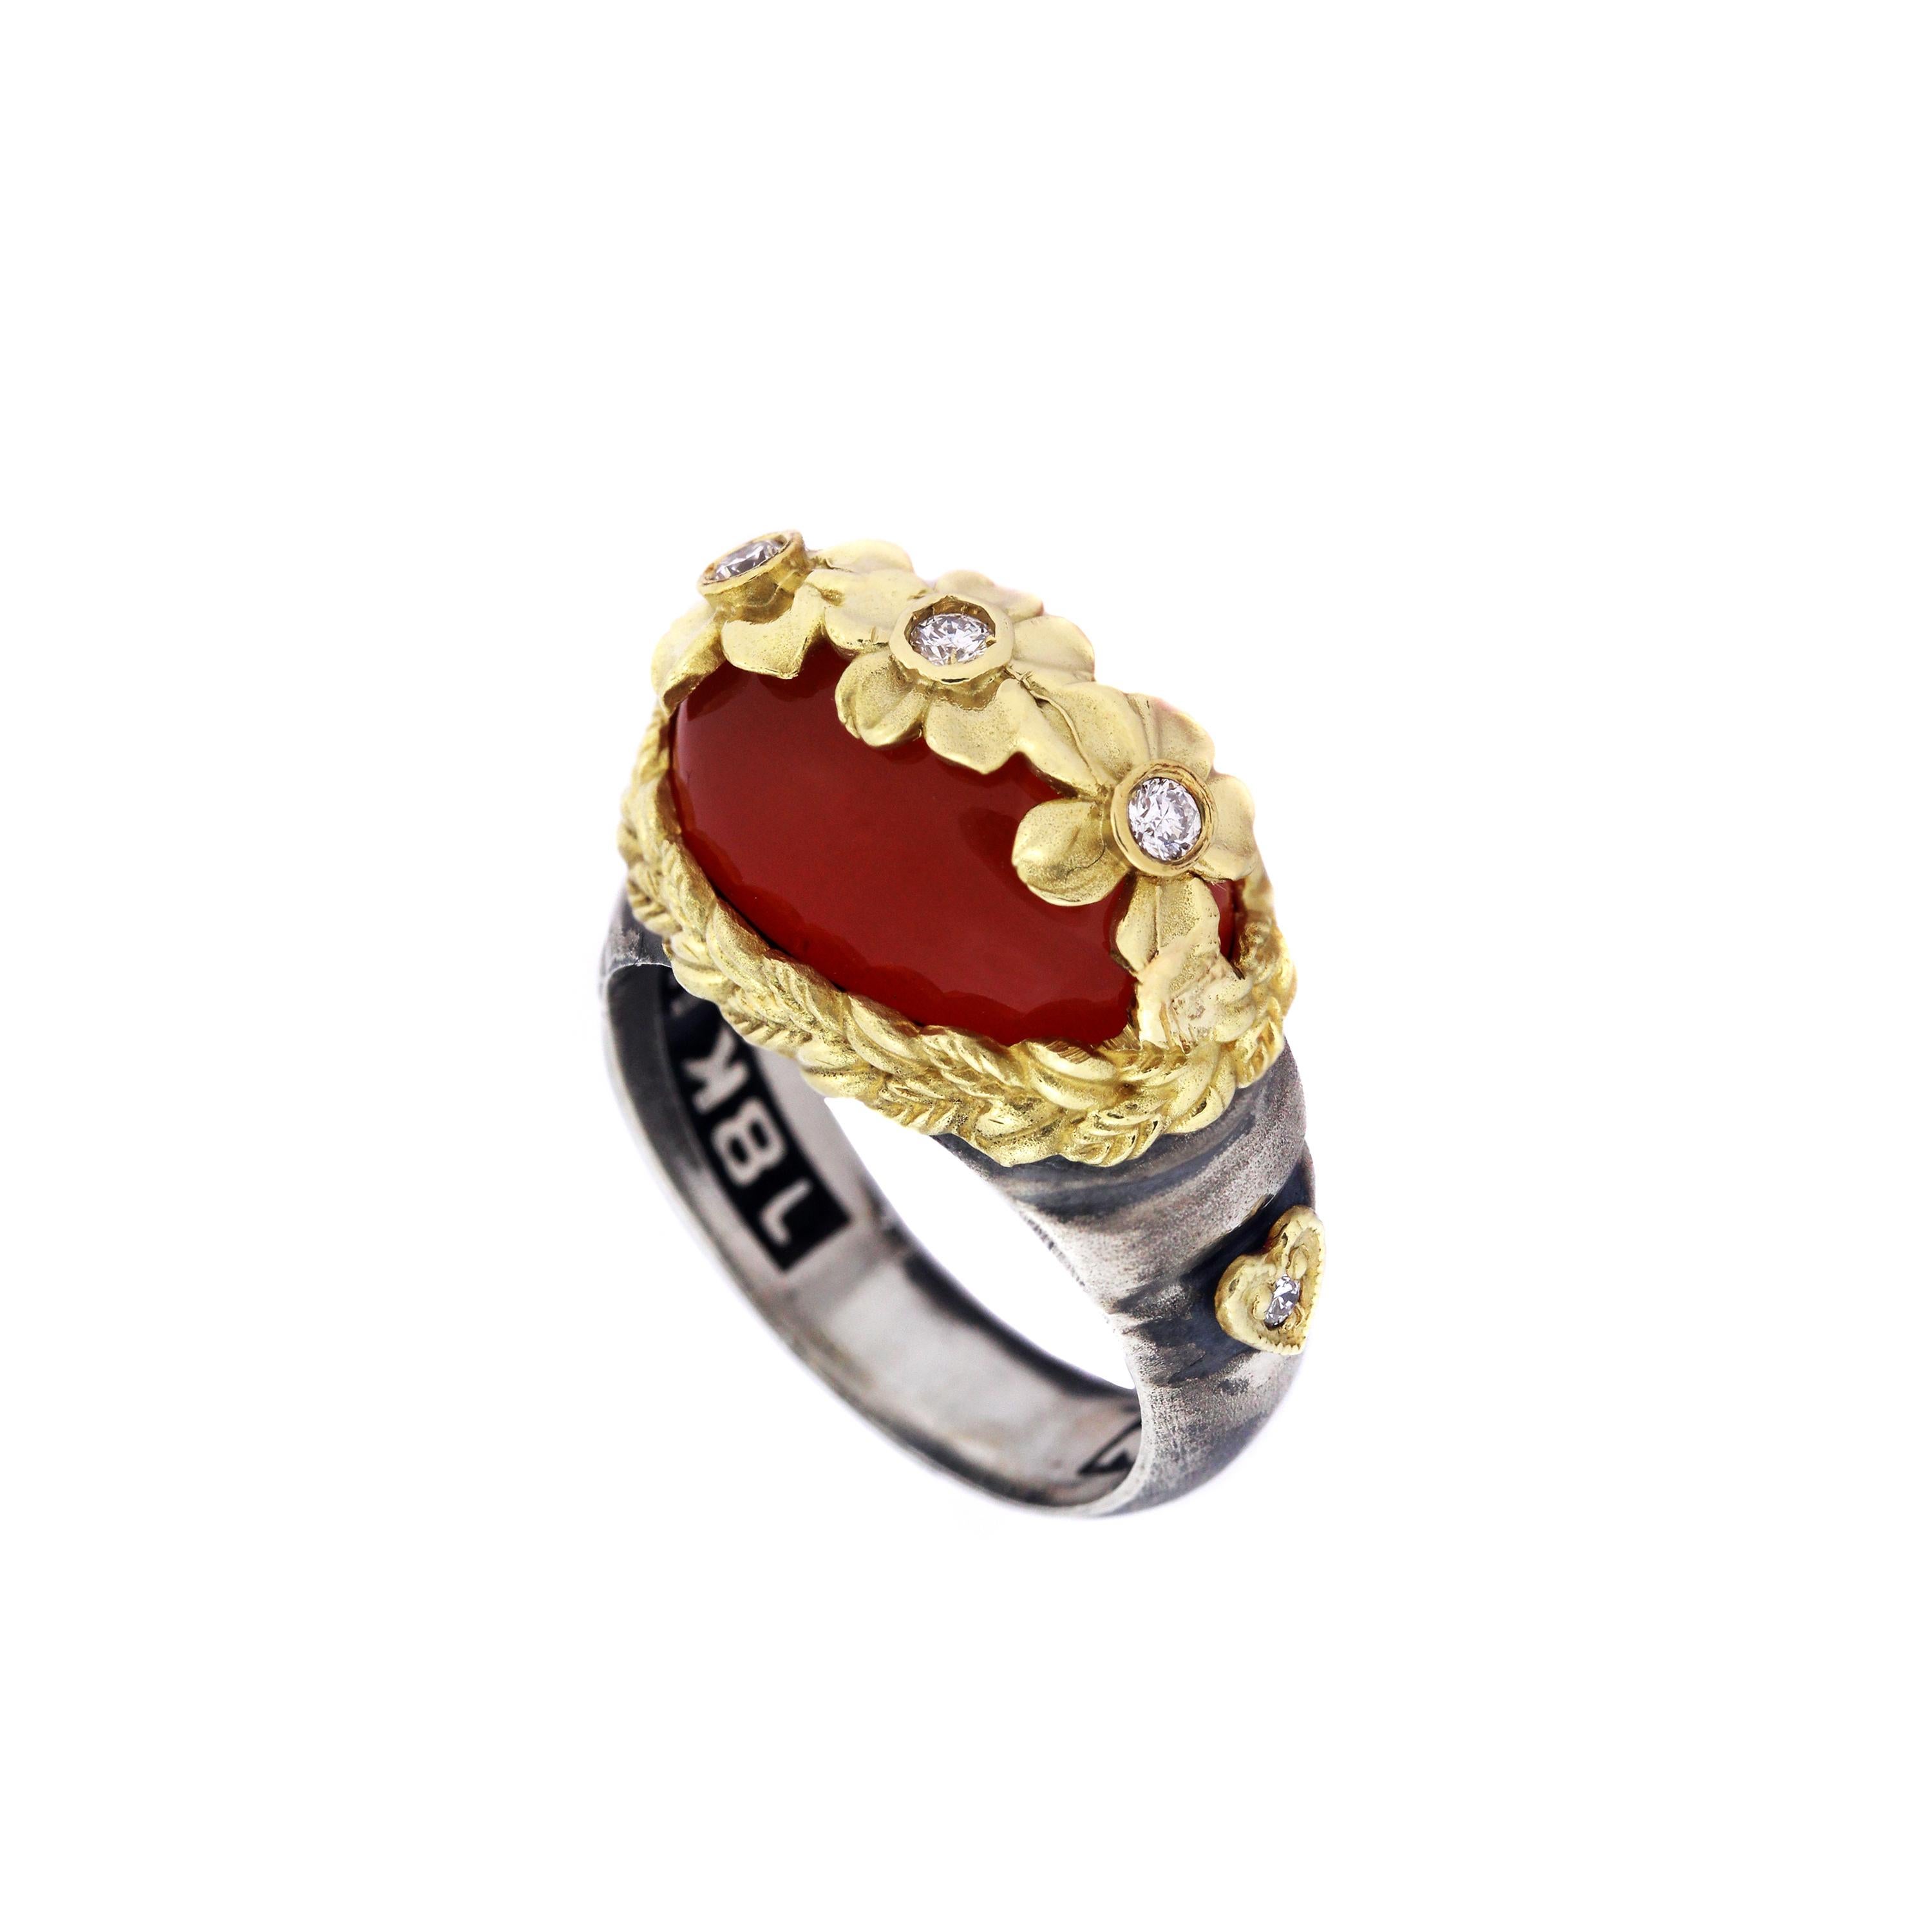 Carnelian and Diamond Floral Ring with Sterling Silver and Gold Stambolian